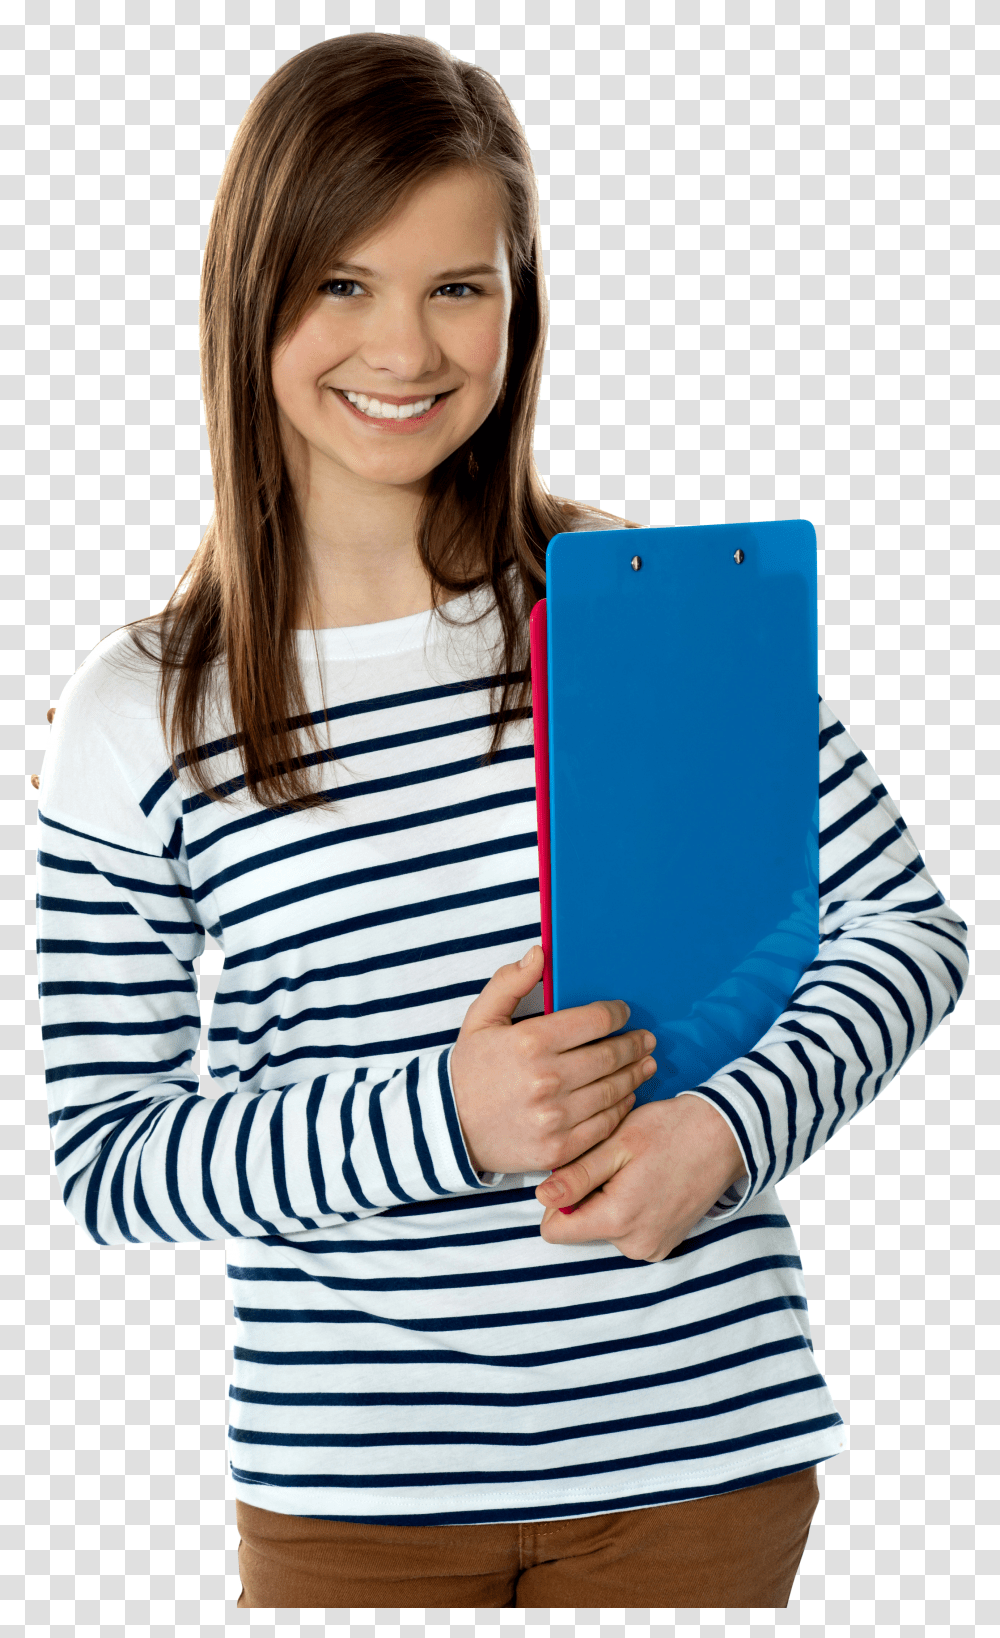 Young Girl Student Image For Free Download Woman Student Transparent Png